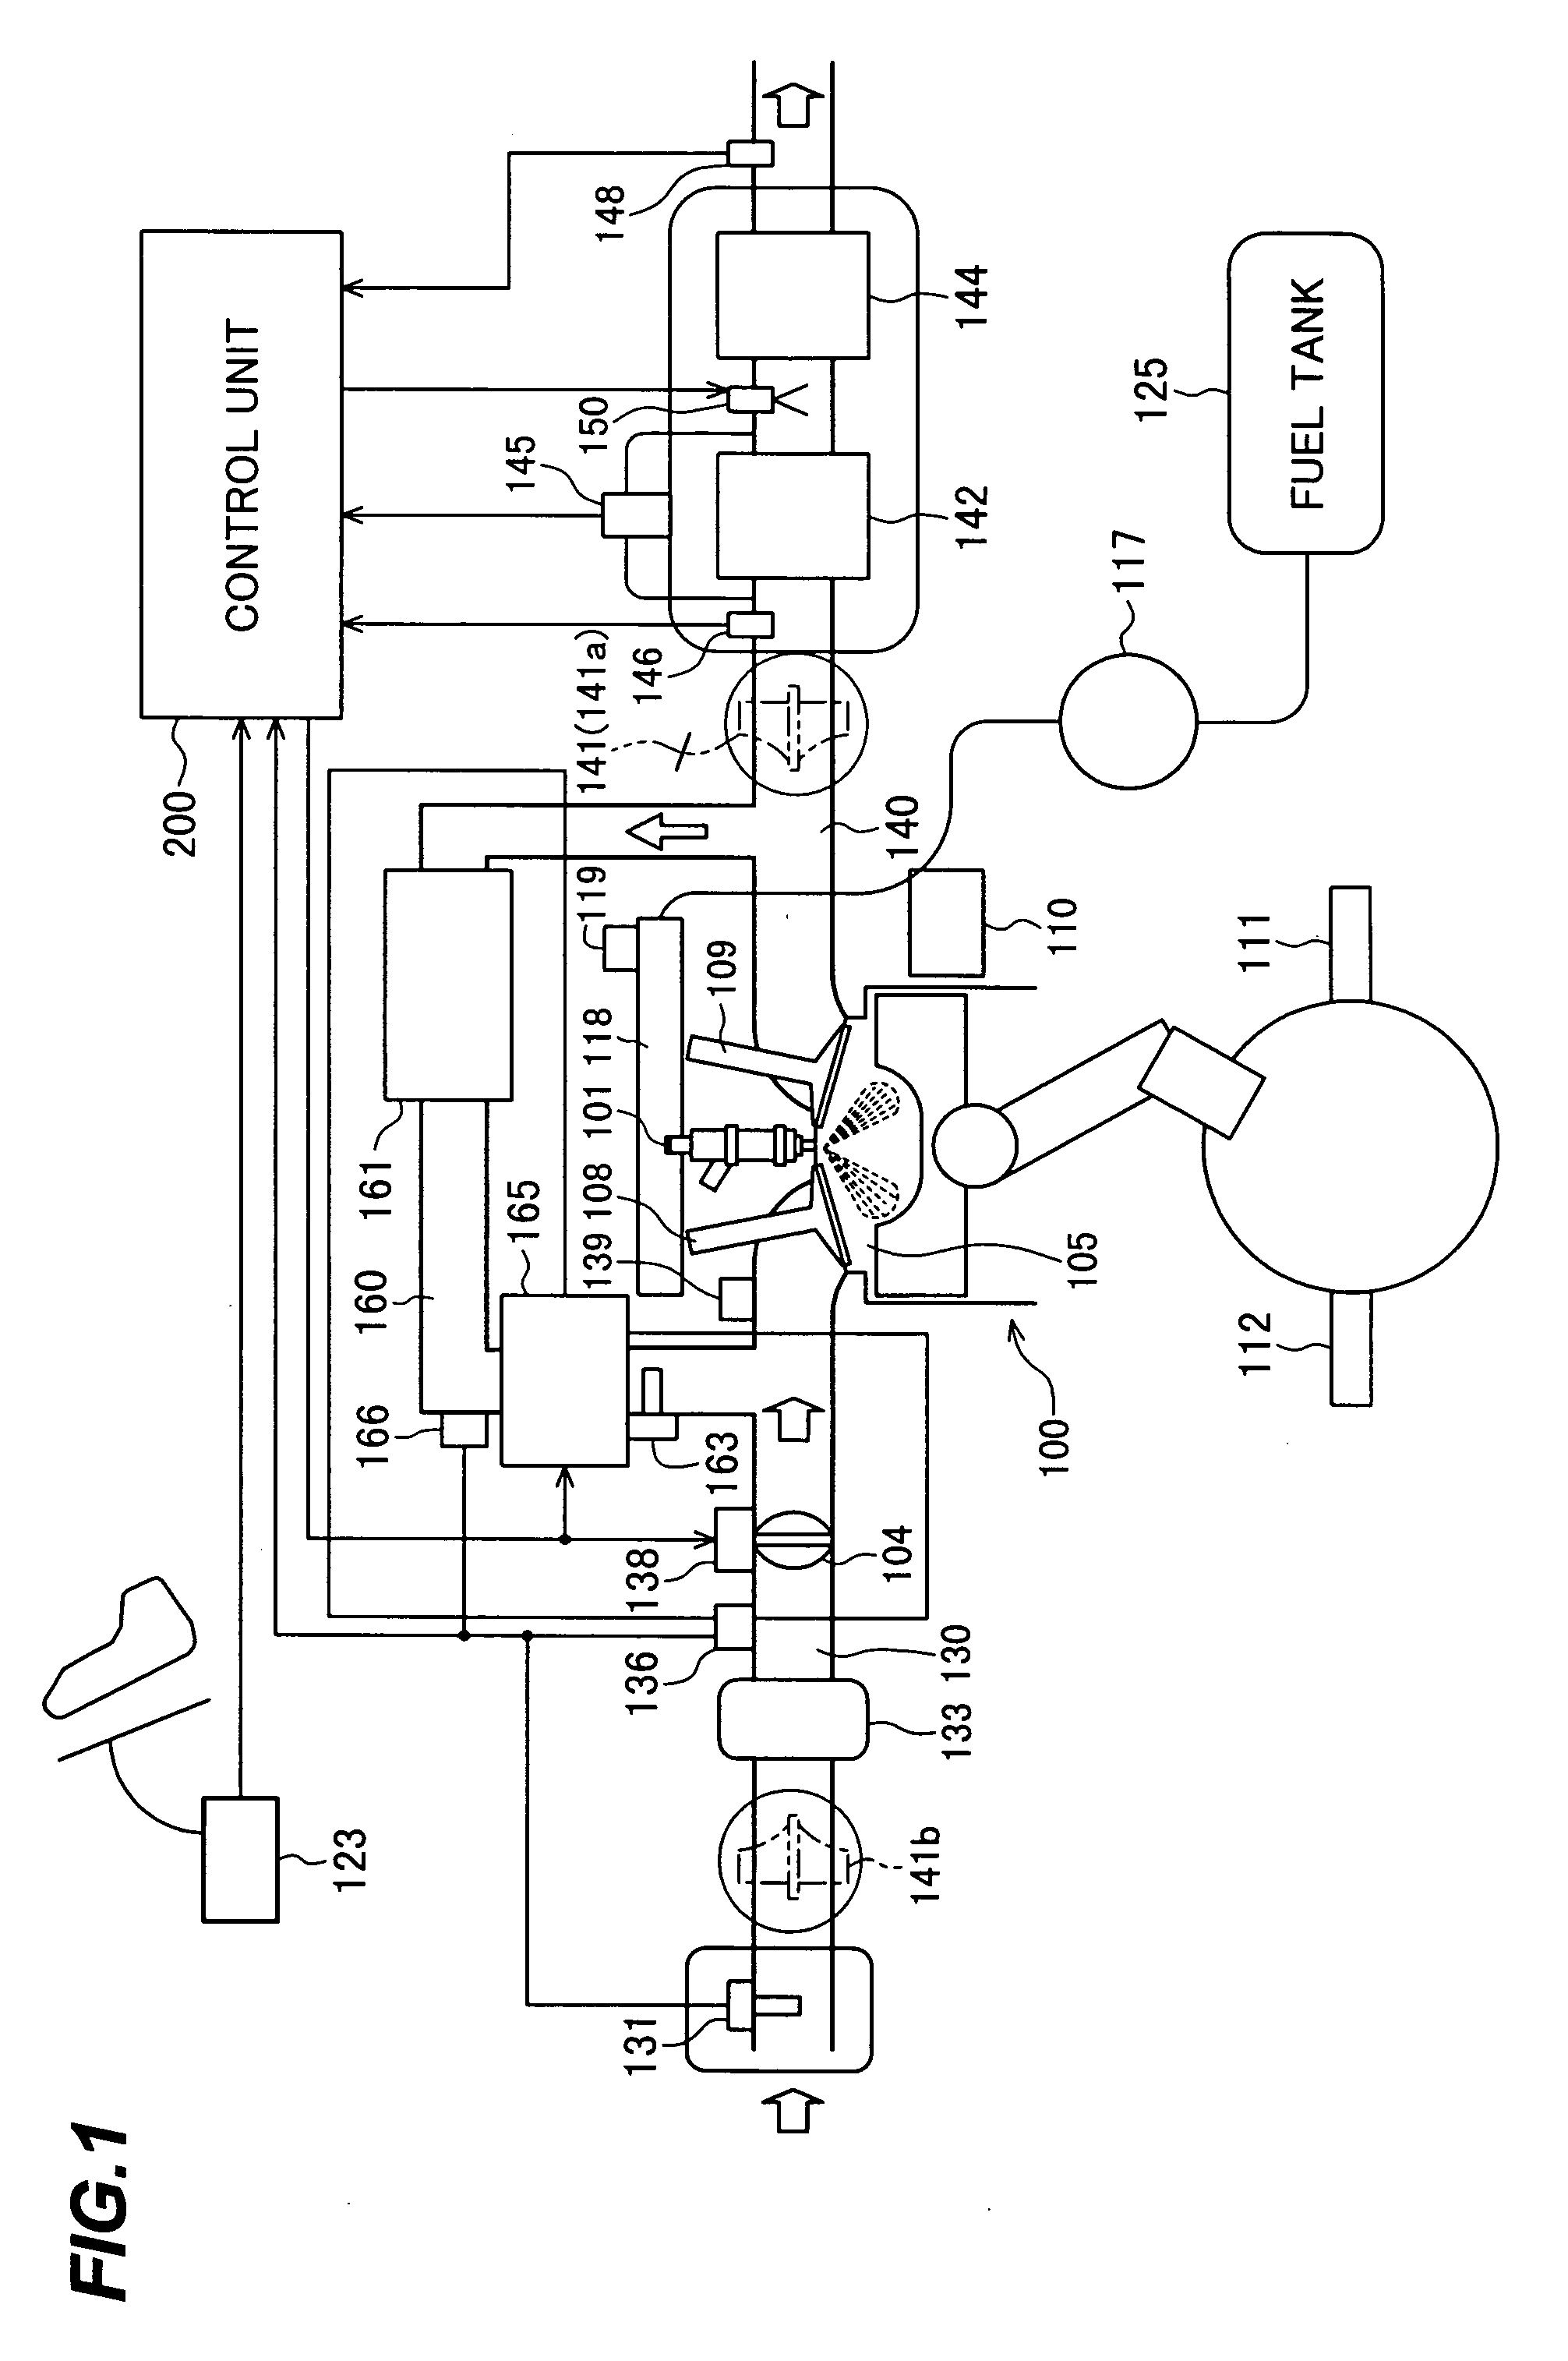 Engine exhaust gas cleaning method and system